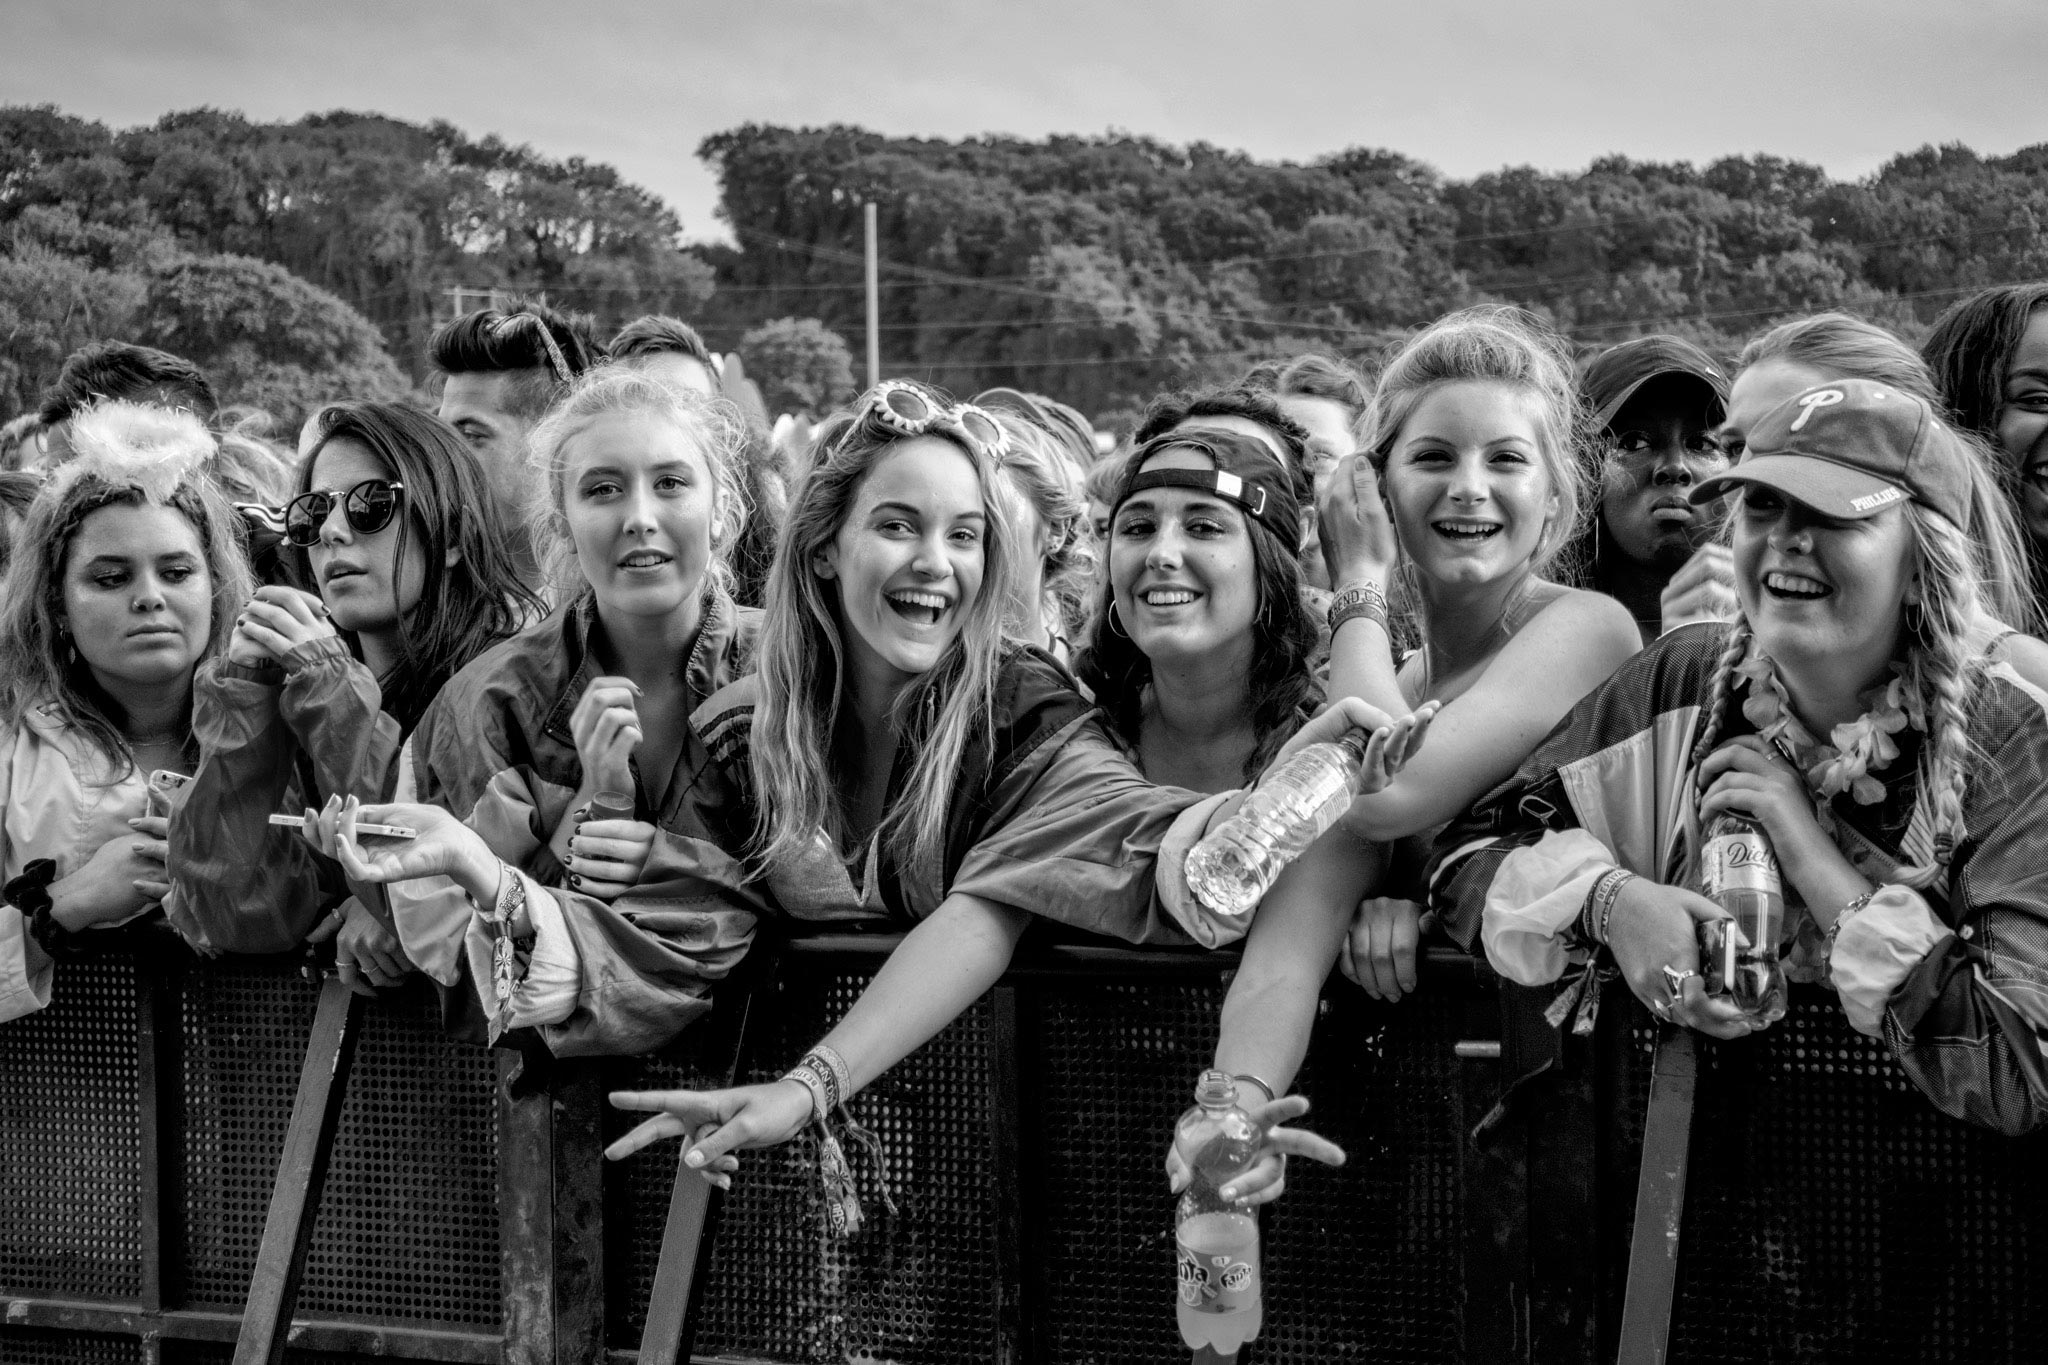 A vibrant moment captured by Wright Content, featuring a group of young female fans posing for the camera at a music festival. Positioned at the front of the crowd, the girls exude excitement as they listen to their favorite artist perform on stage at Bestival Festival on the Isle of Wight. Wright Content specializes in dynamic festival photography.